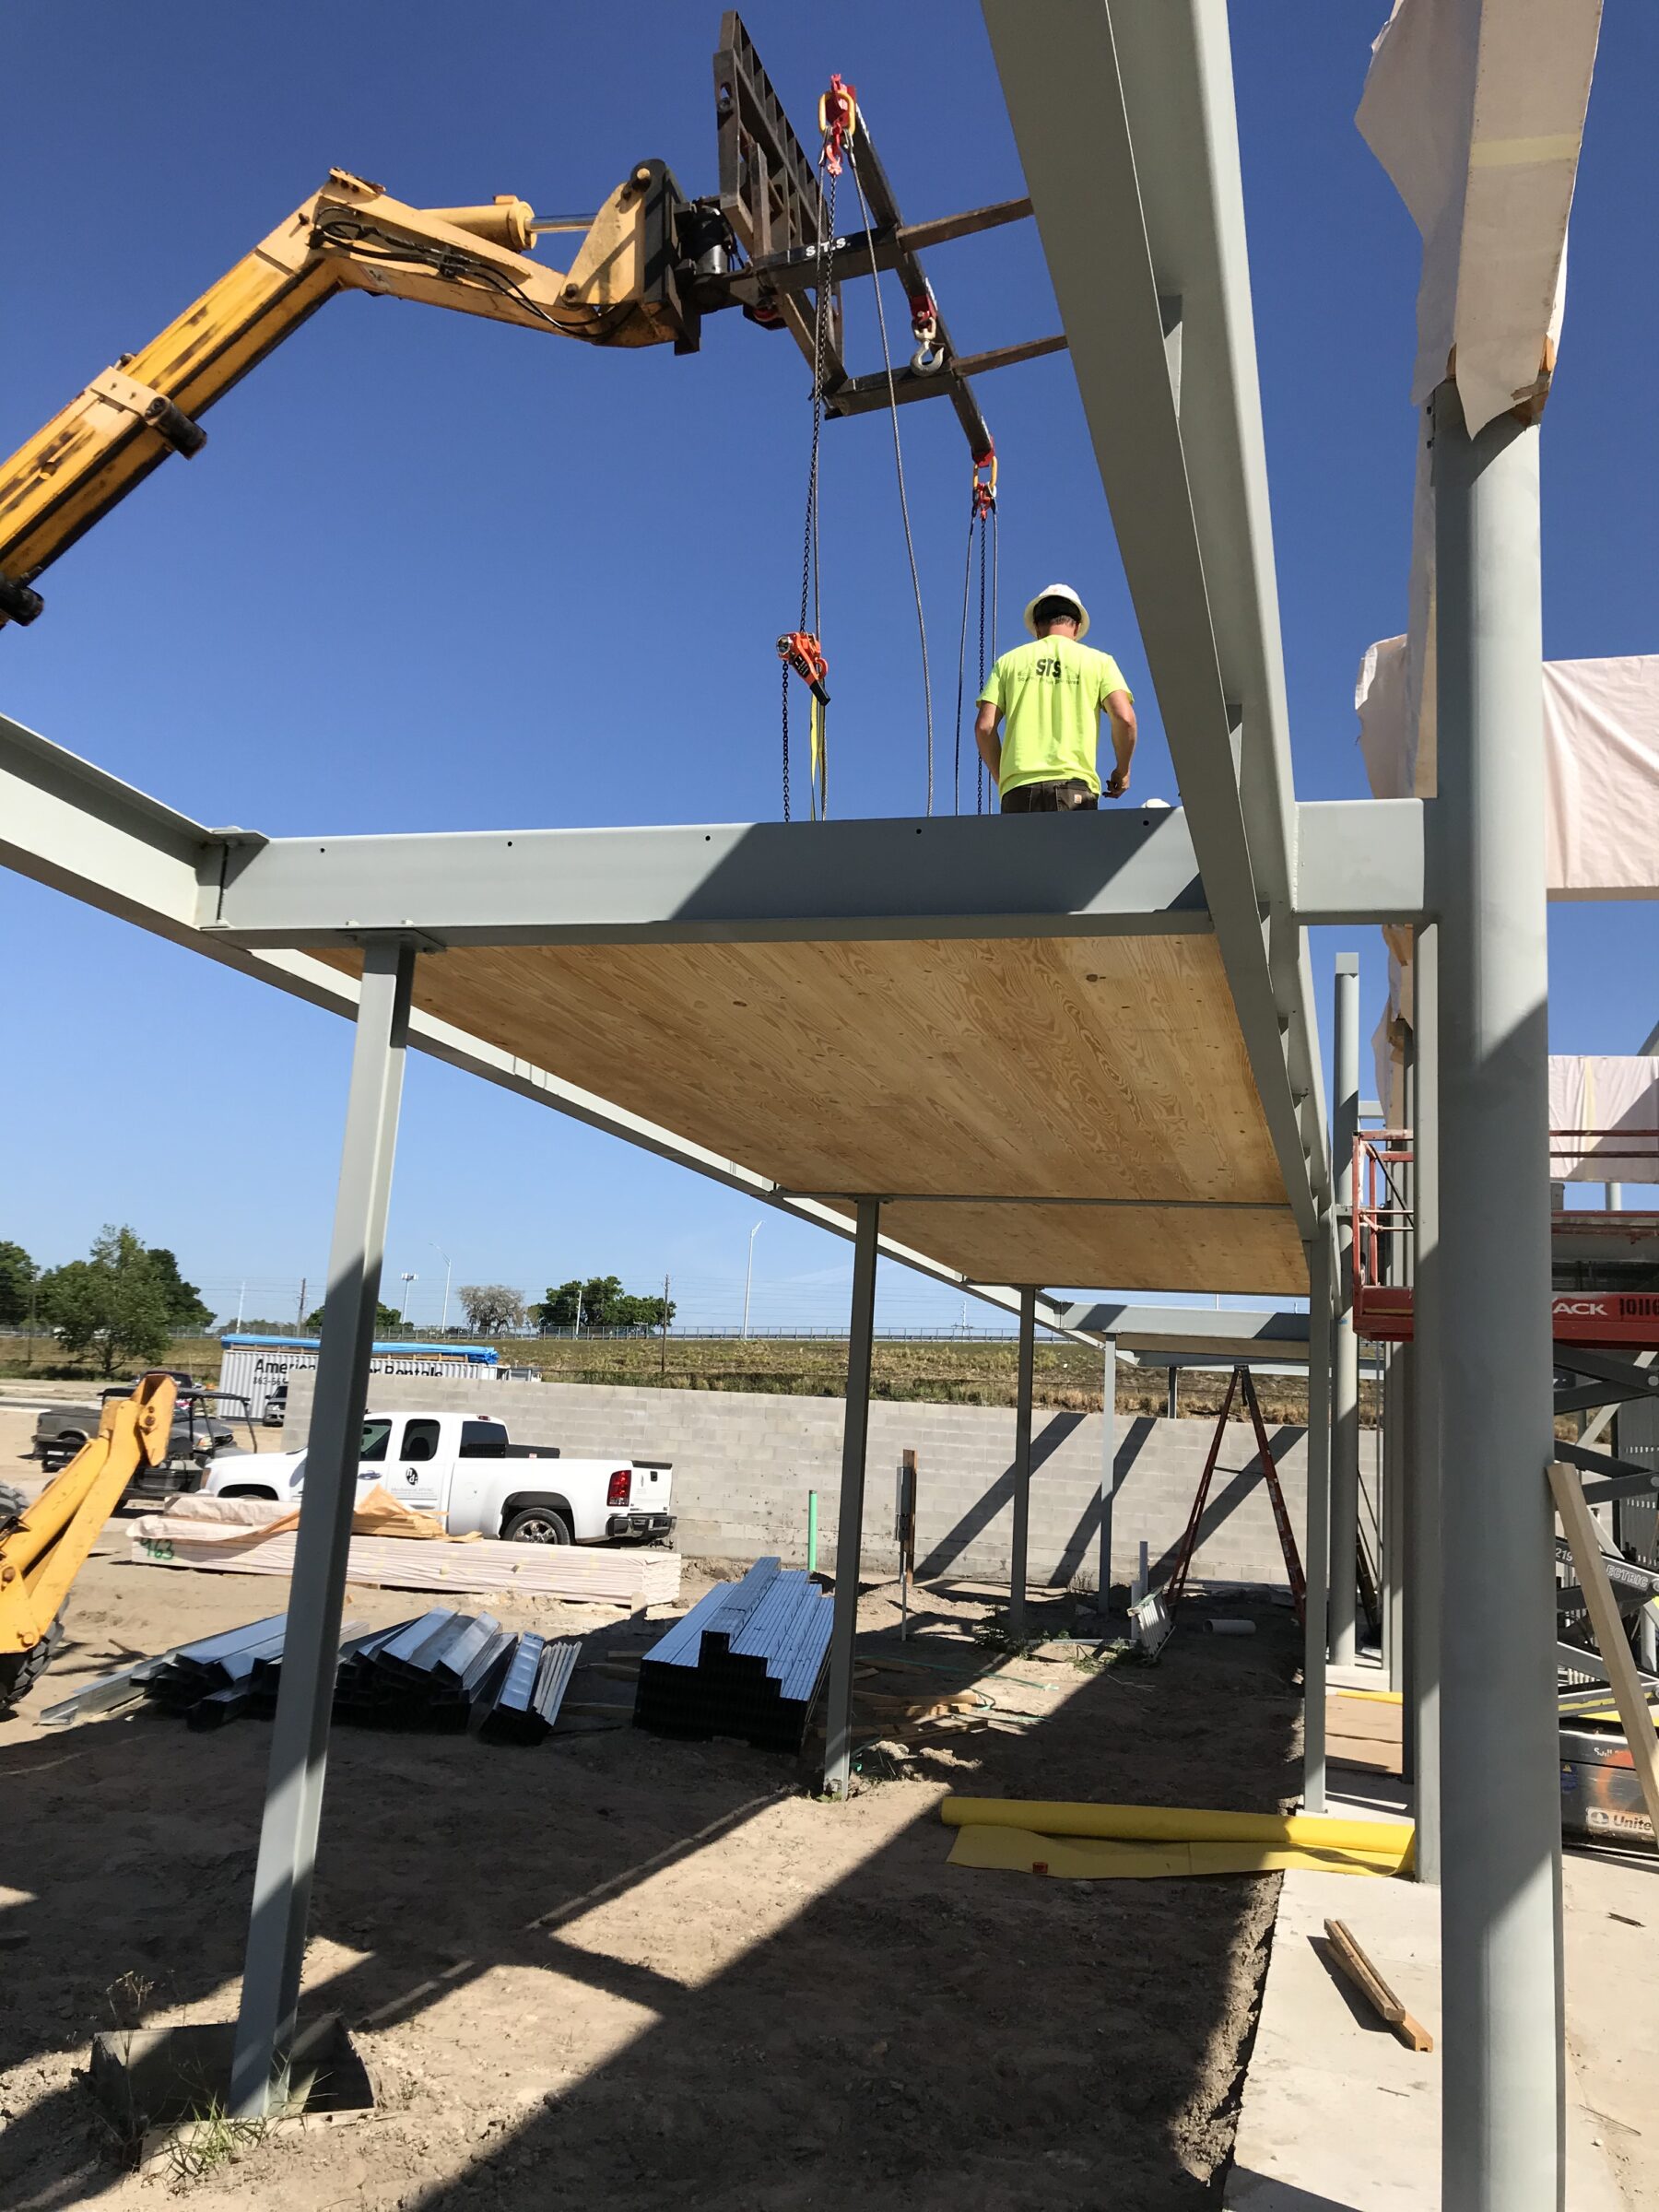 A forklift lowers a CLT panel into place in the wrap-around canopy of the Bonnet Springs Park Event Center during construction